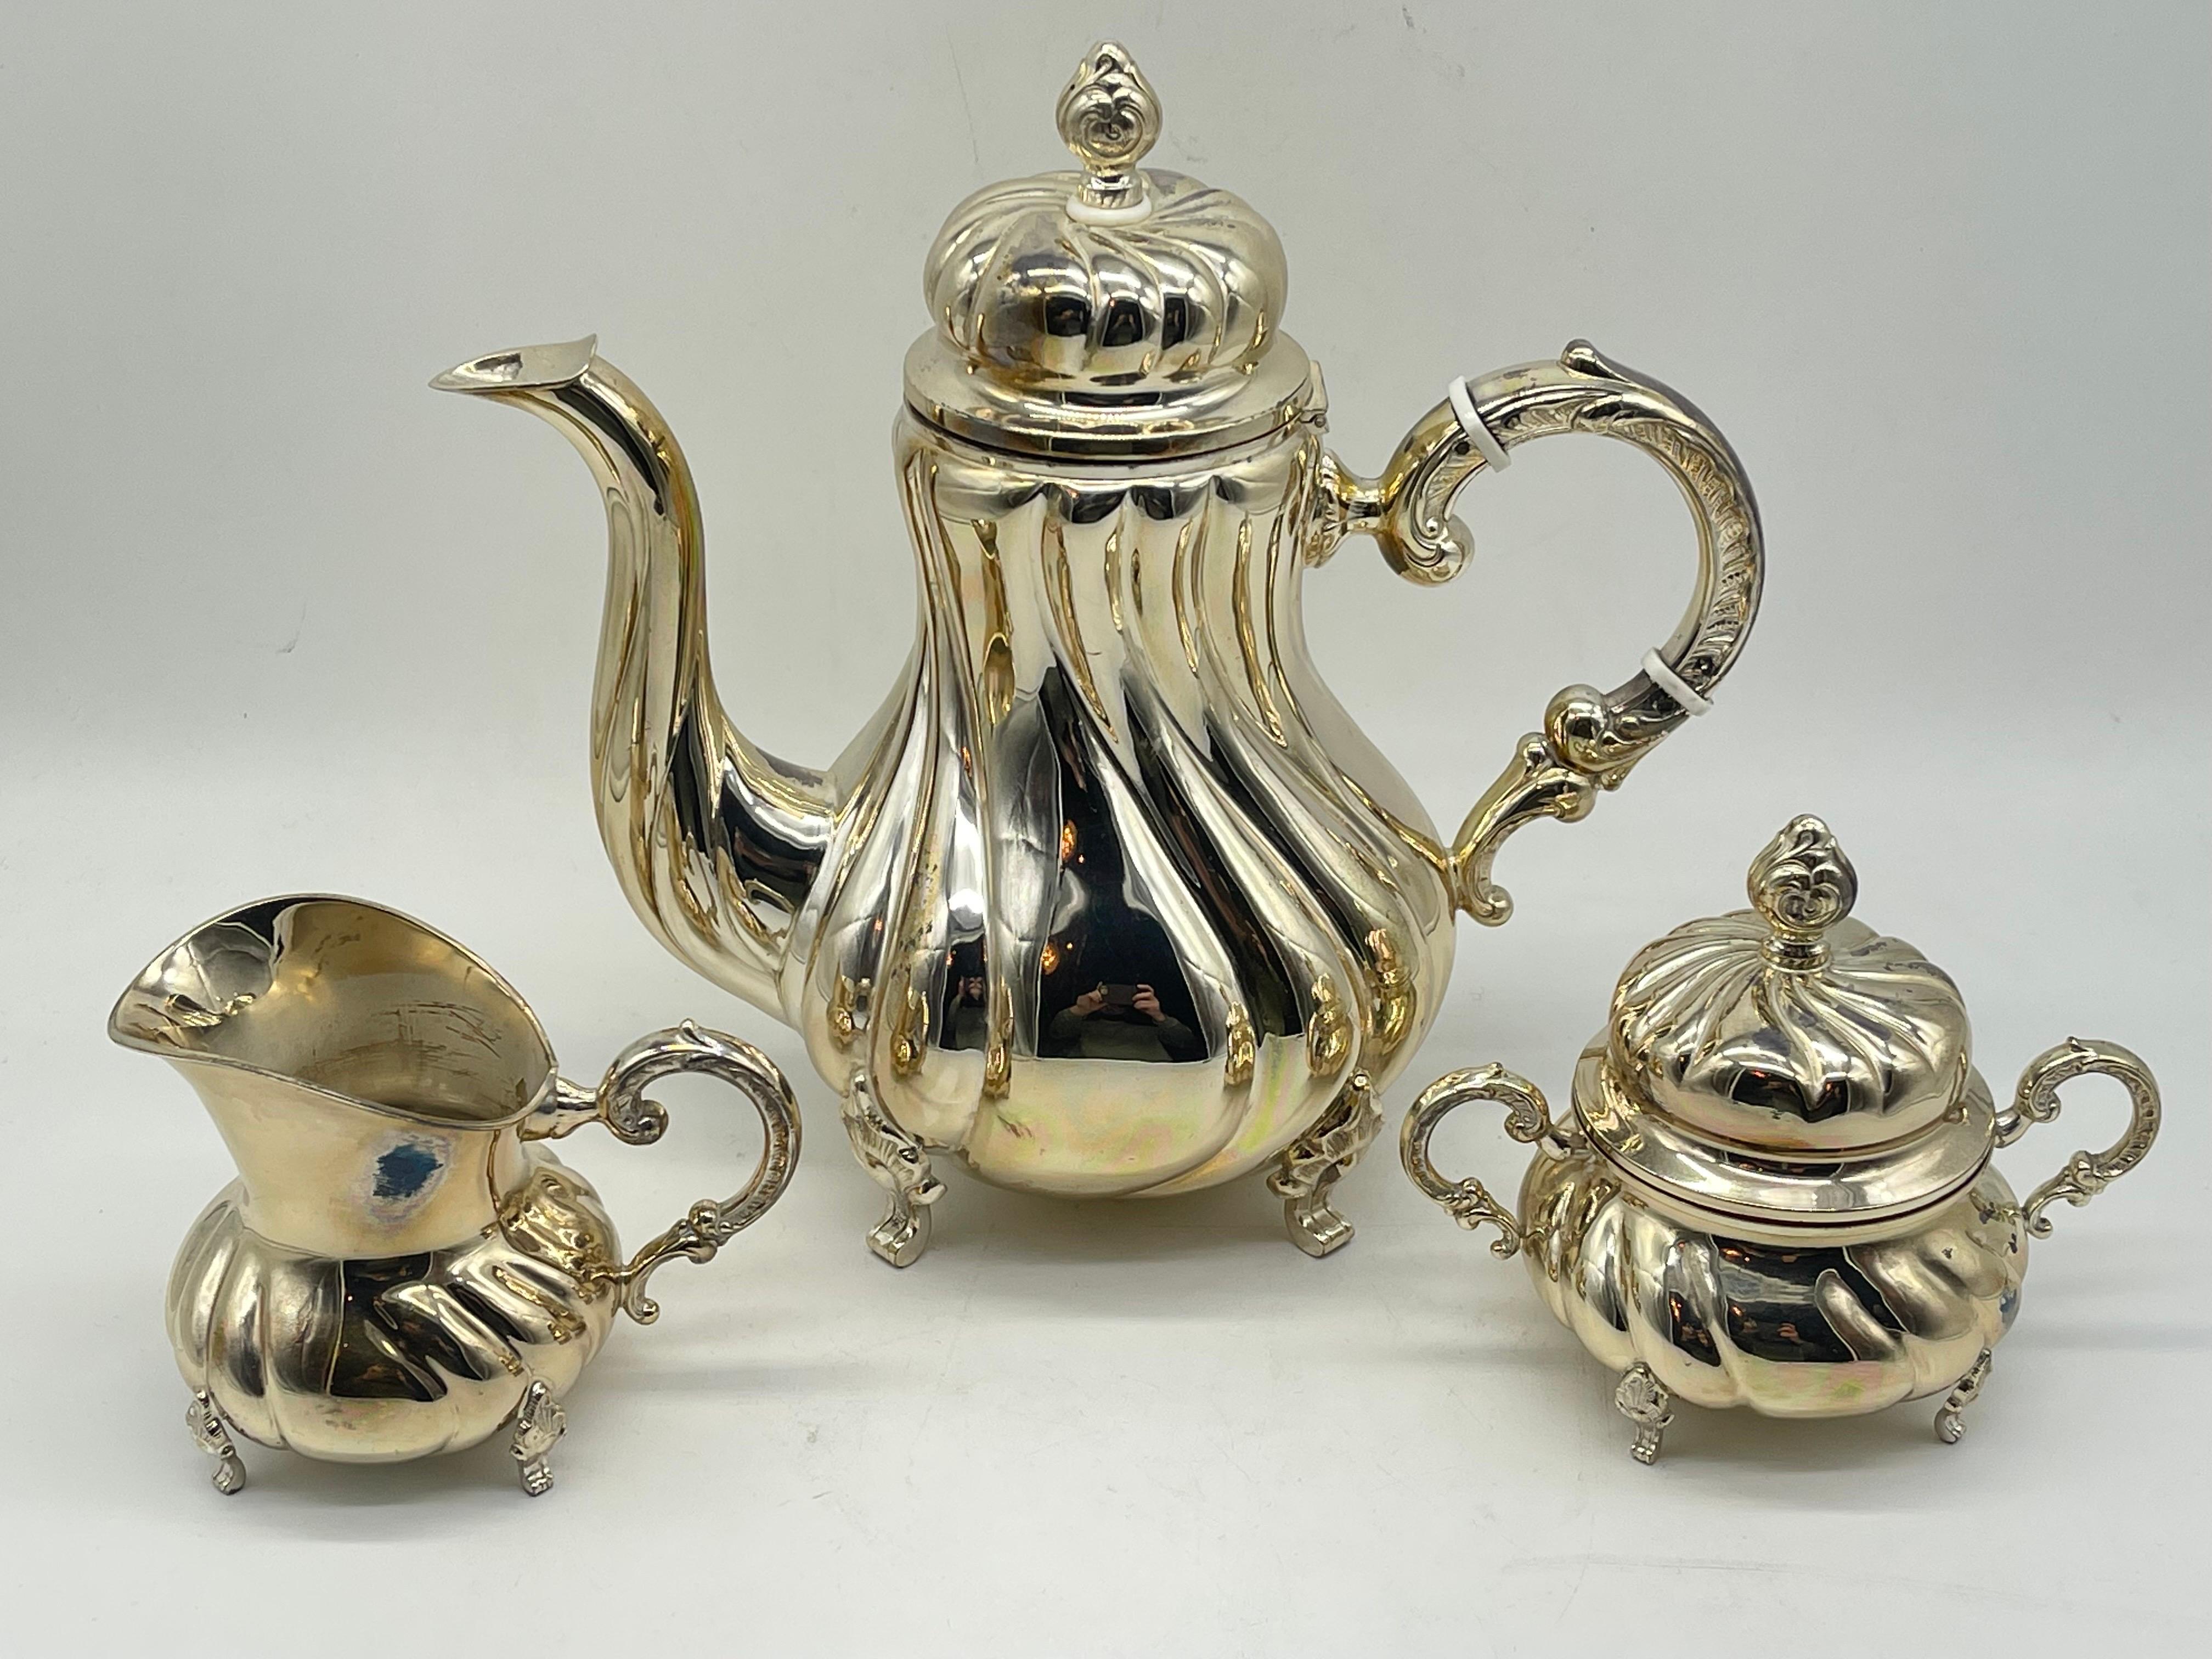 Classic Silver Coffee Centerpiece

925 sterling Silver Germany
stand on 4 feet  
handmade

Half moon & crown
 
3 pieces 
coffee pot (height 22 cm)
sugar box (height 11 cm)
milk jug (height: 9 cm)

Half moon & crown

Weight: 864 grams

The condition